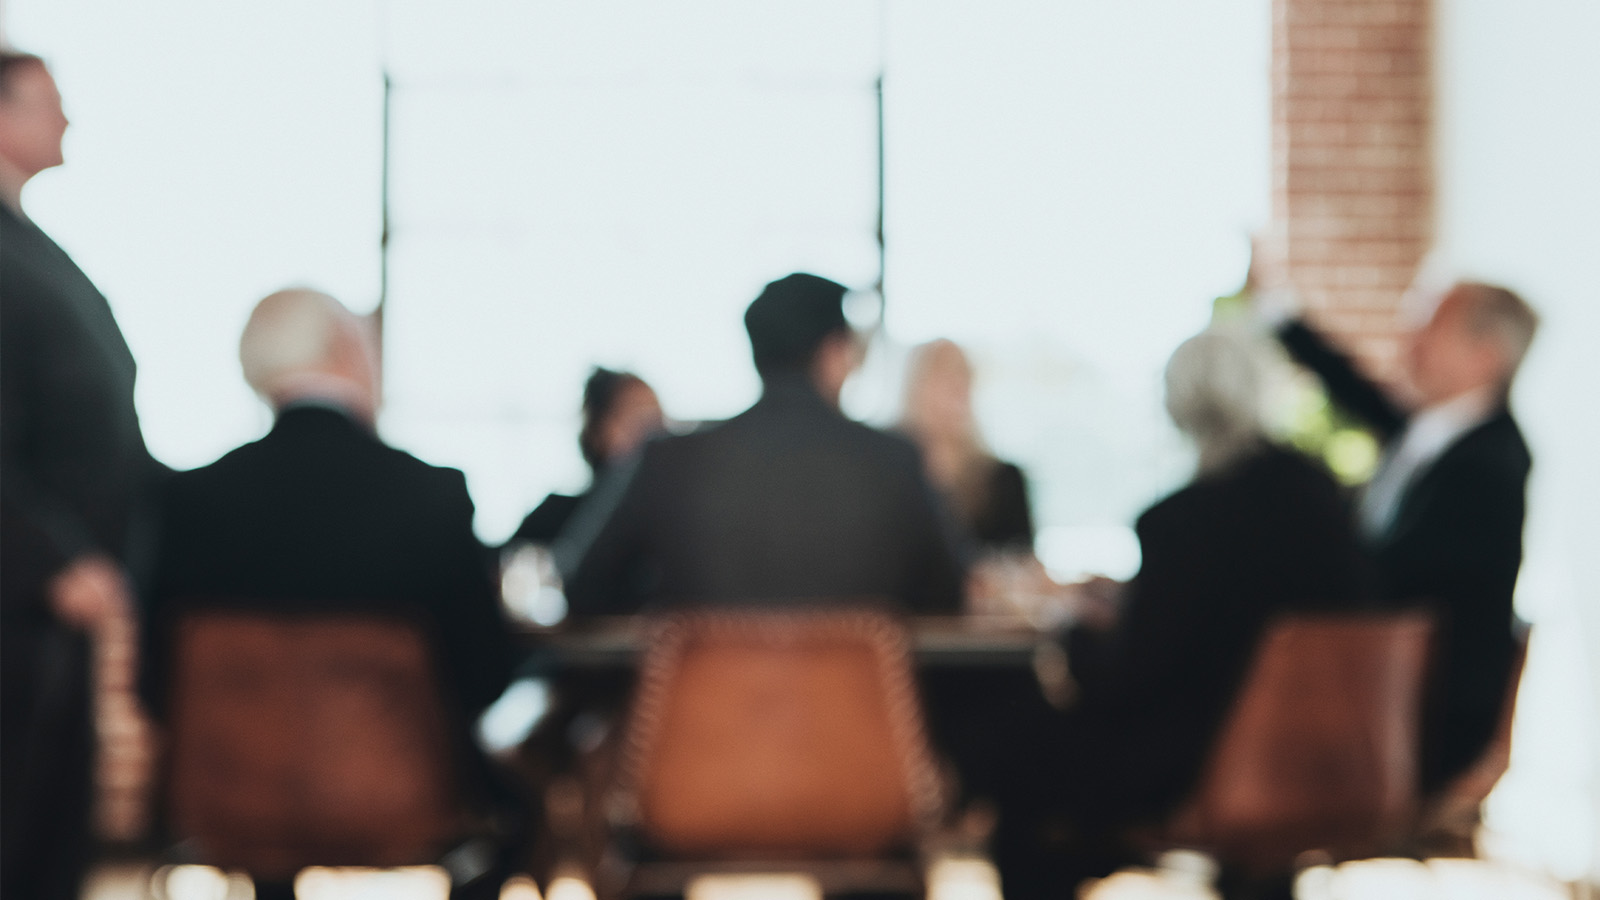 An out-of-focus photo of a corporate boardroom